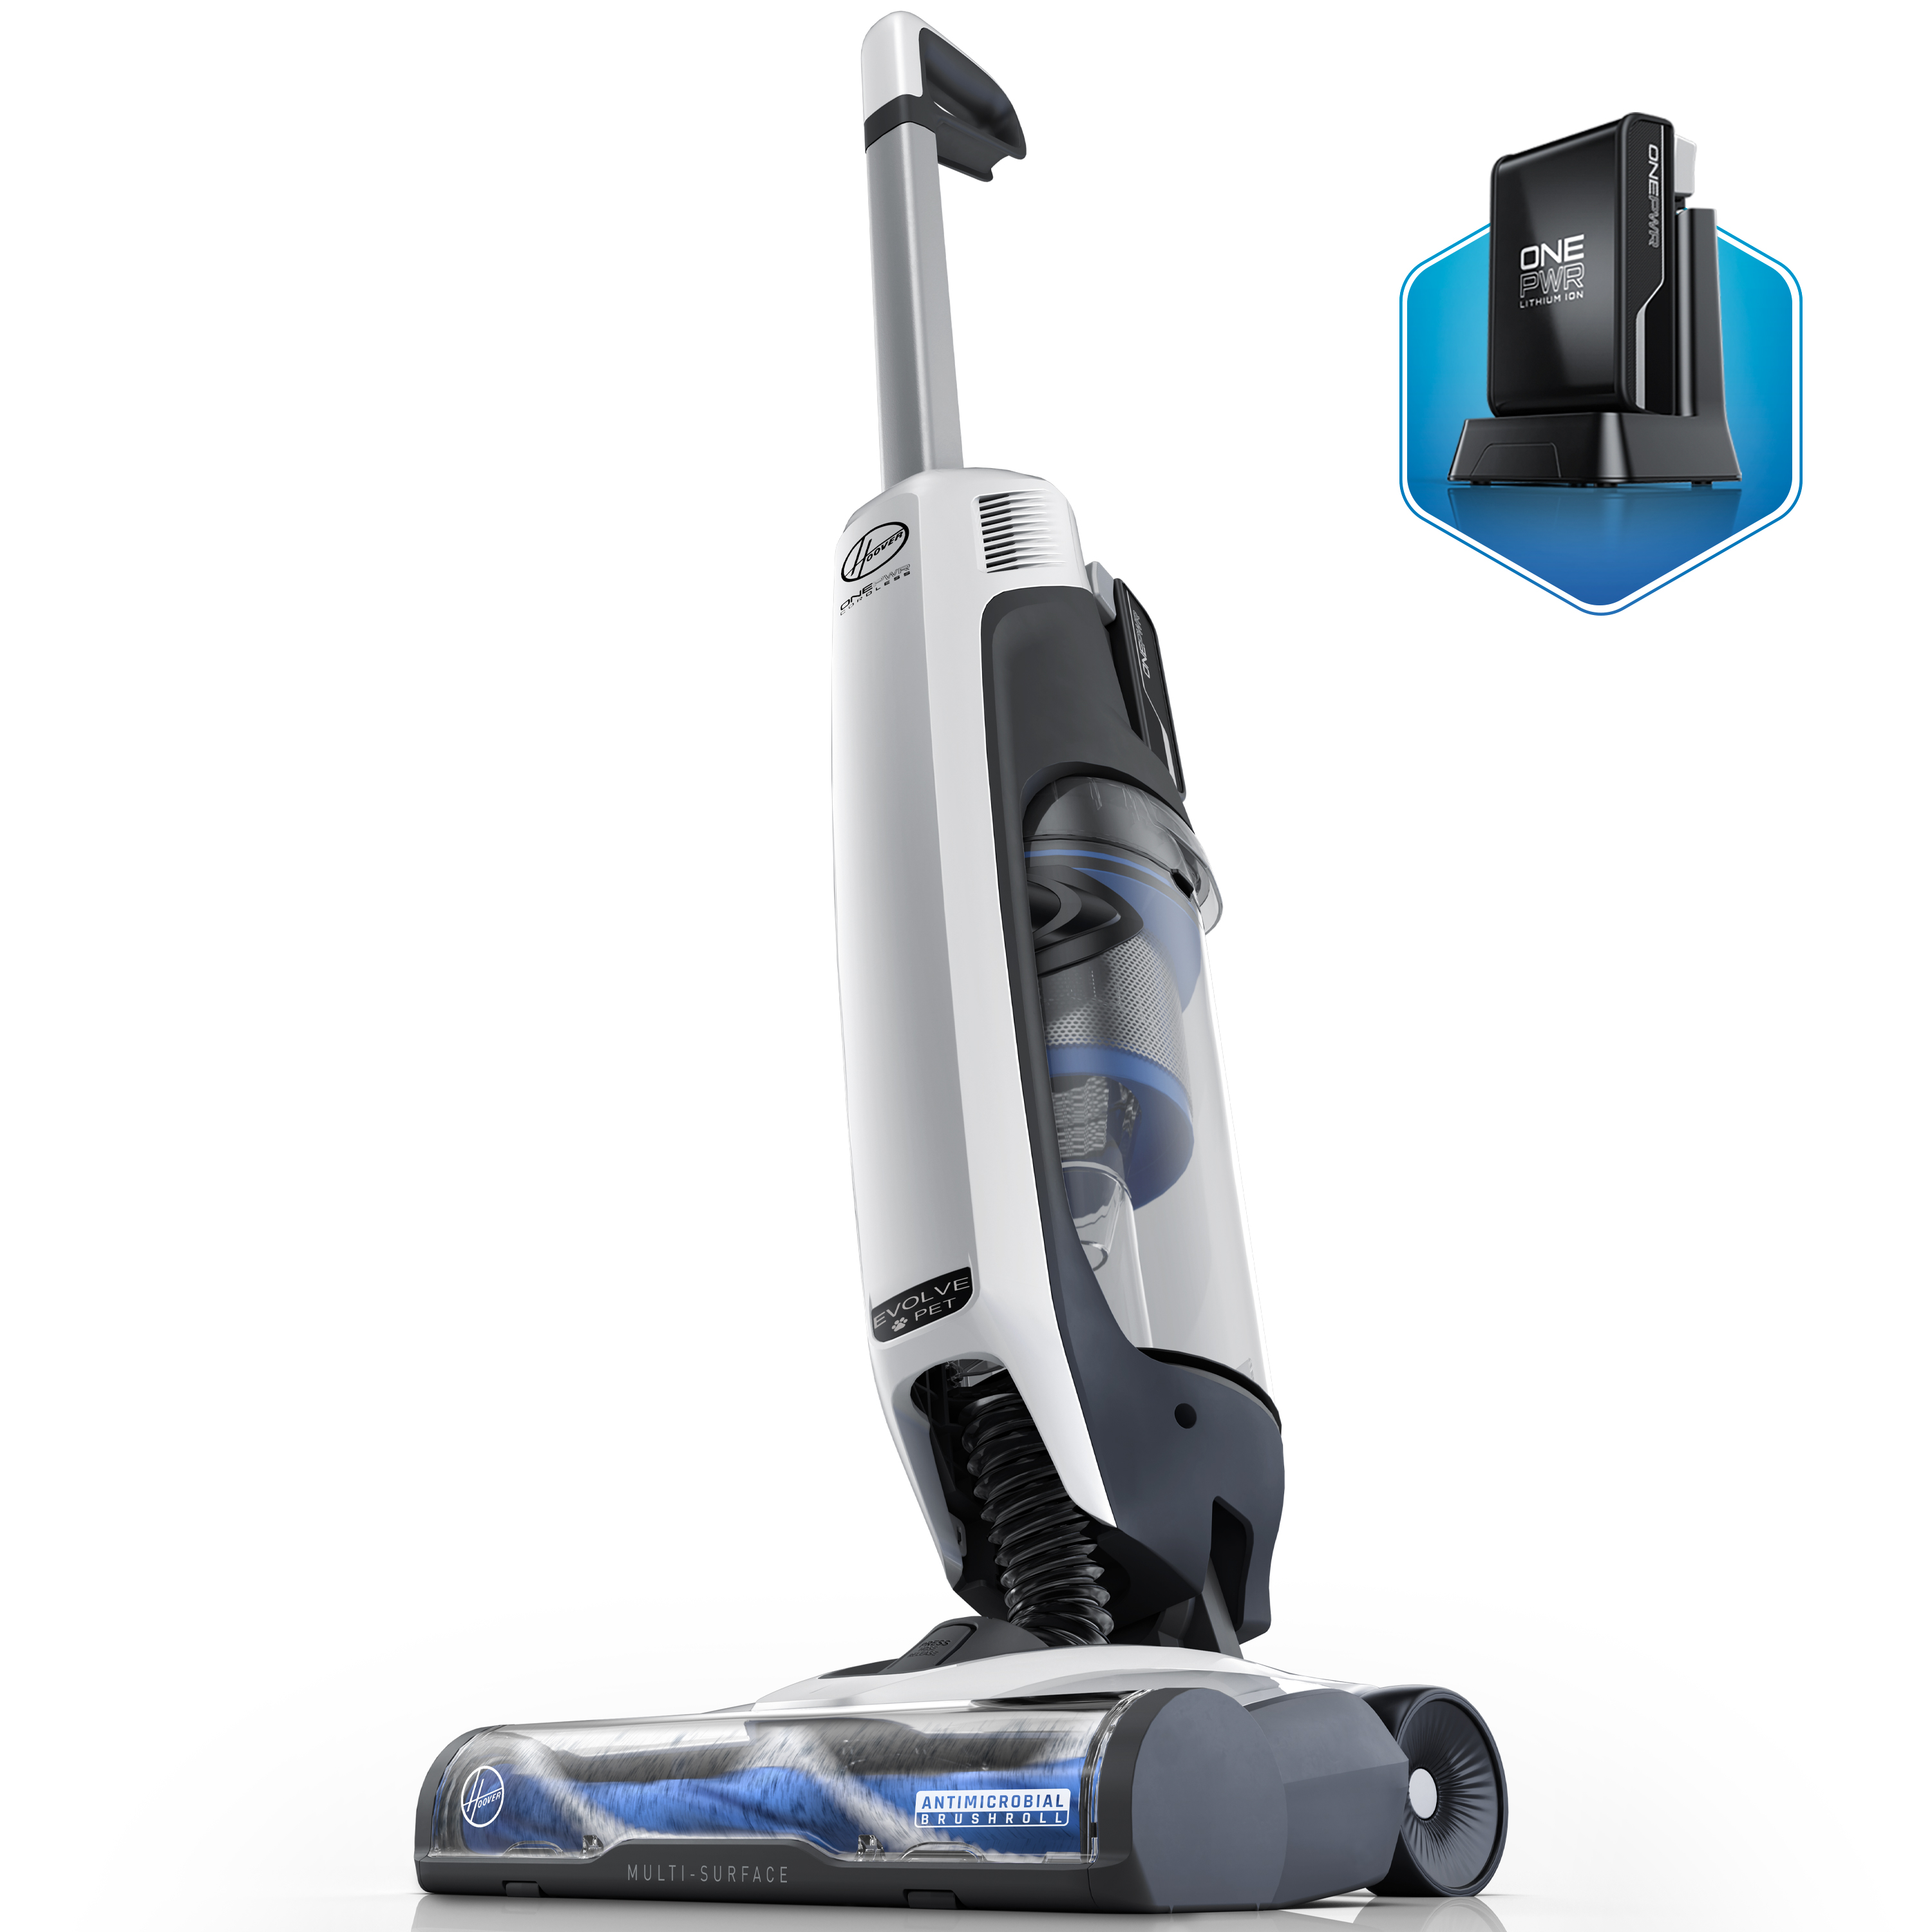 Hoover ONEPWR Evolve Pet Cordless Upright Vacuum Cleaner - Kit BH53420PC - image 1 of 8